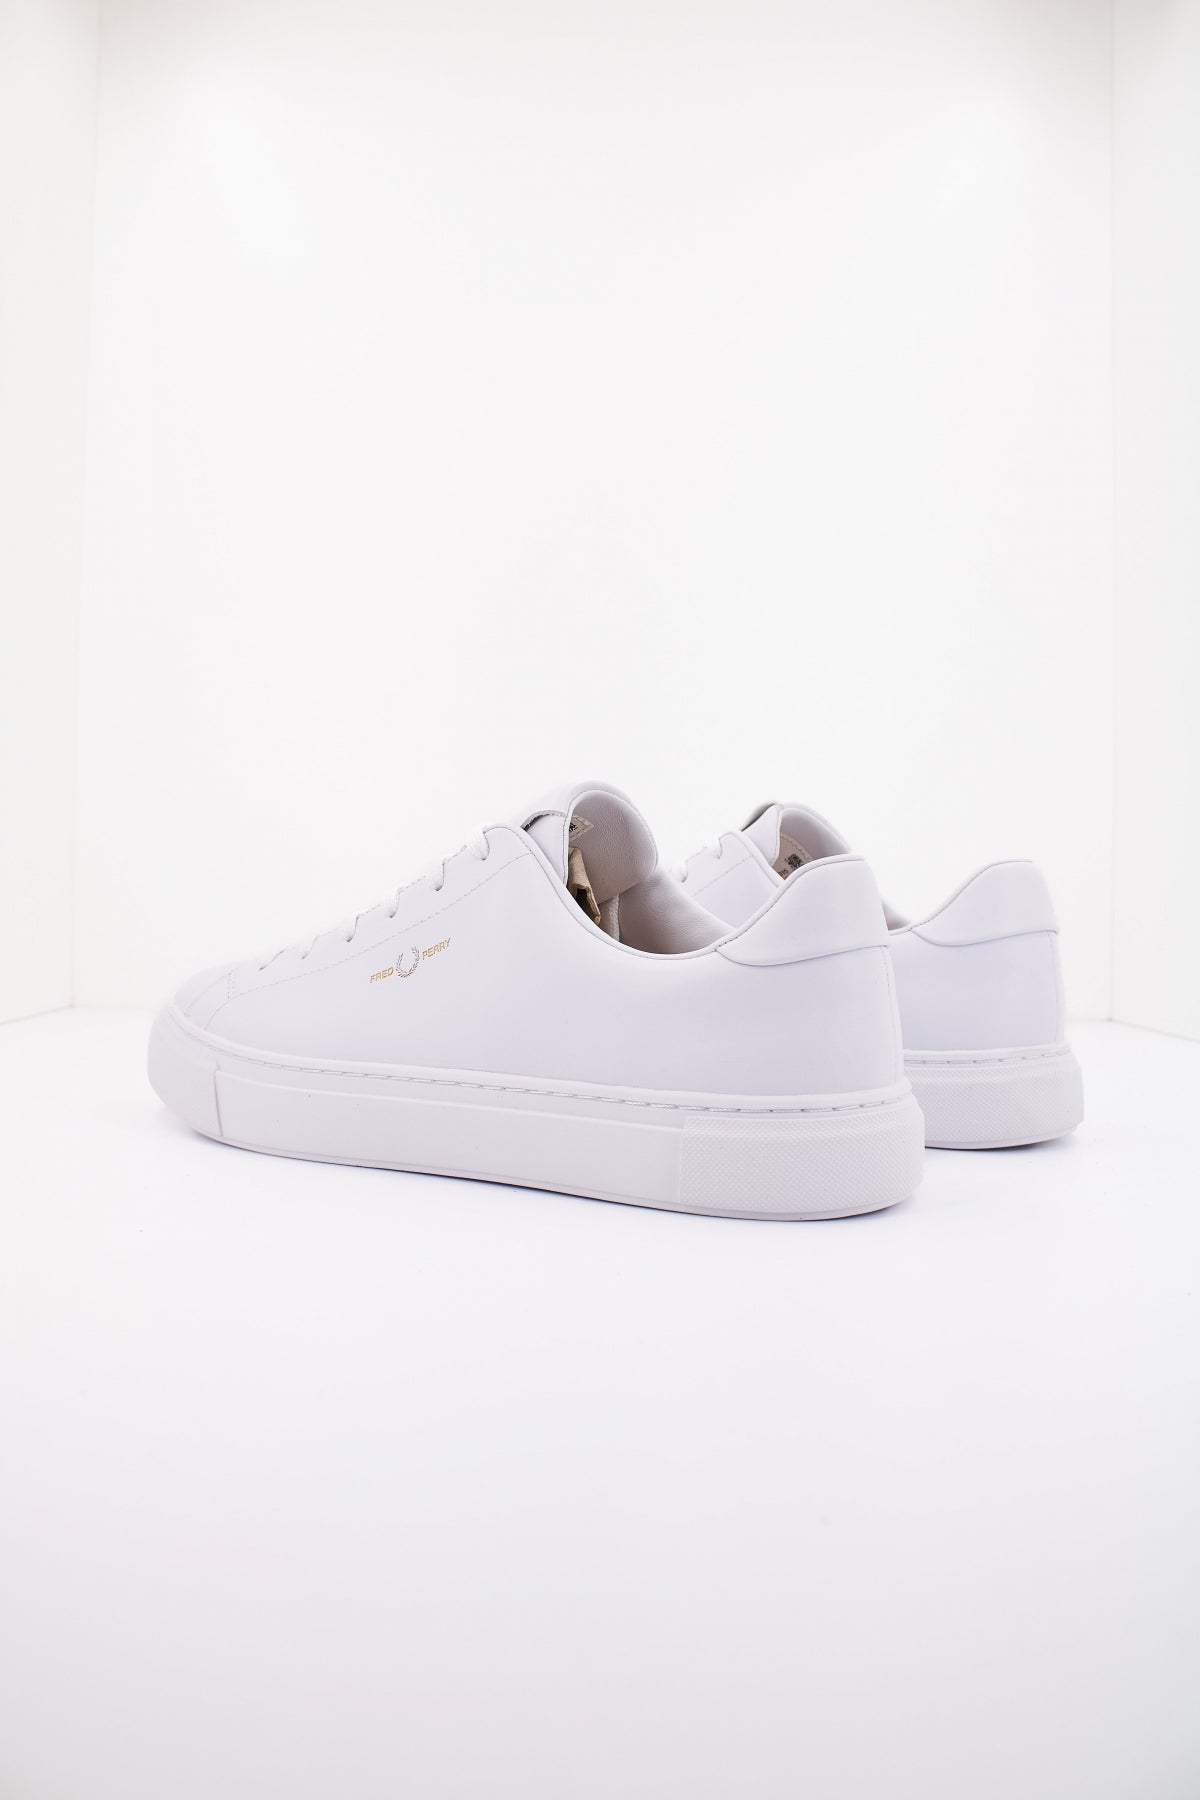 FRED PERRY B LEATHER en color BLANCO  (3)